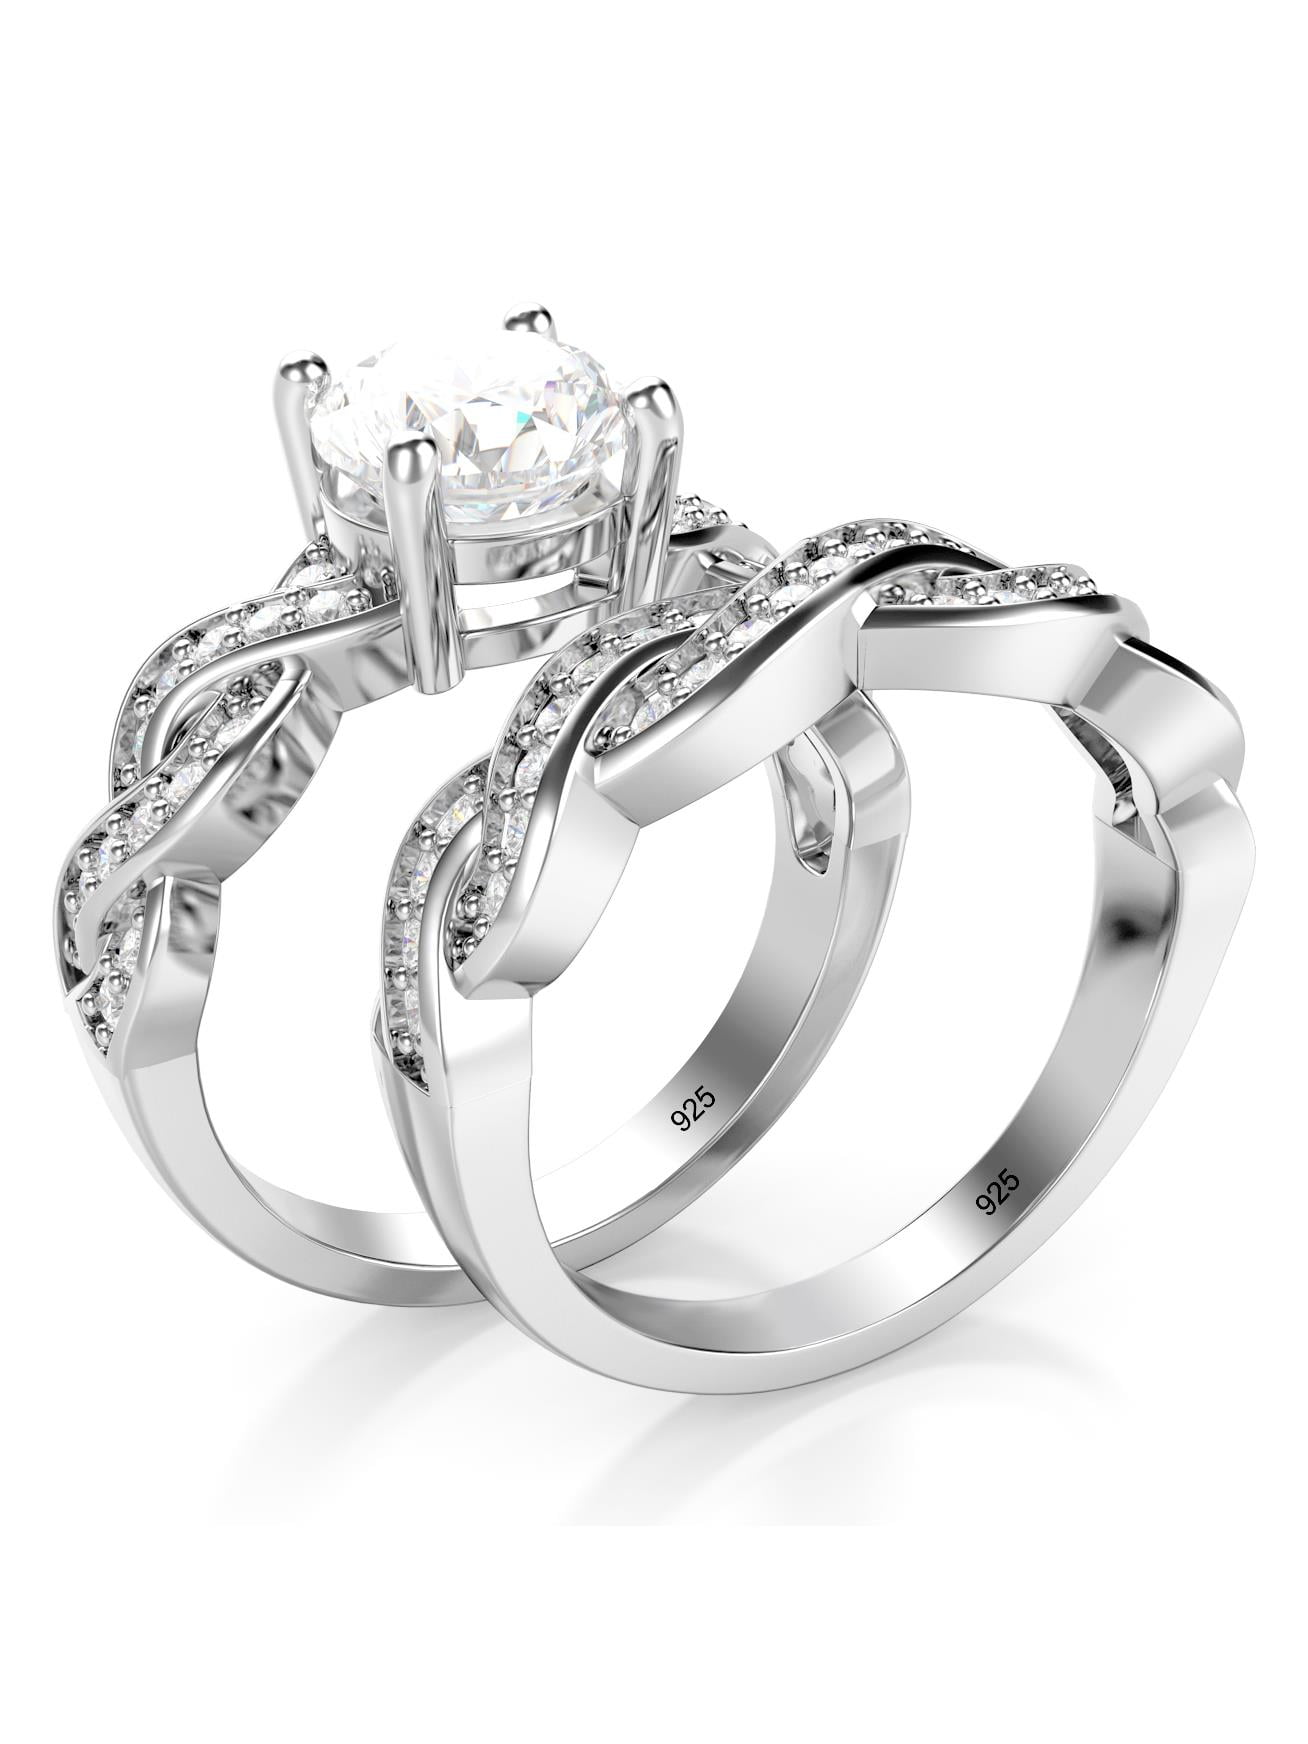 Best Quality Free Gift Box Sterling Silver Cz Ring